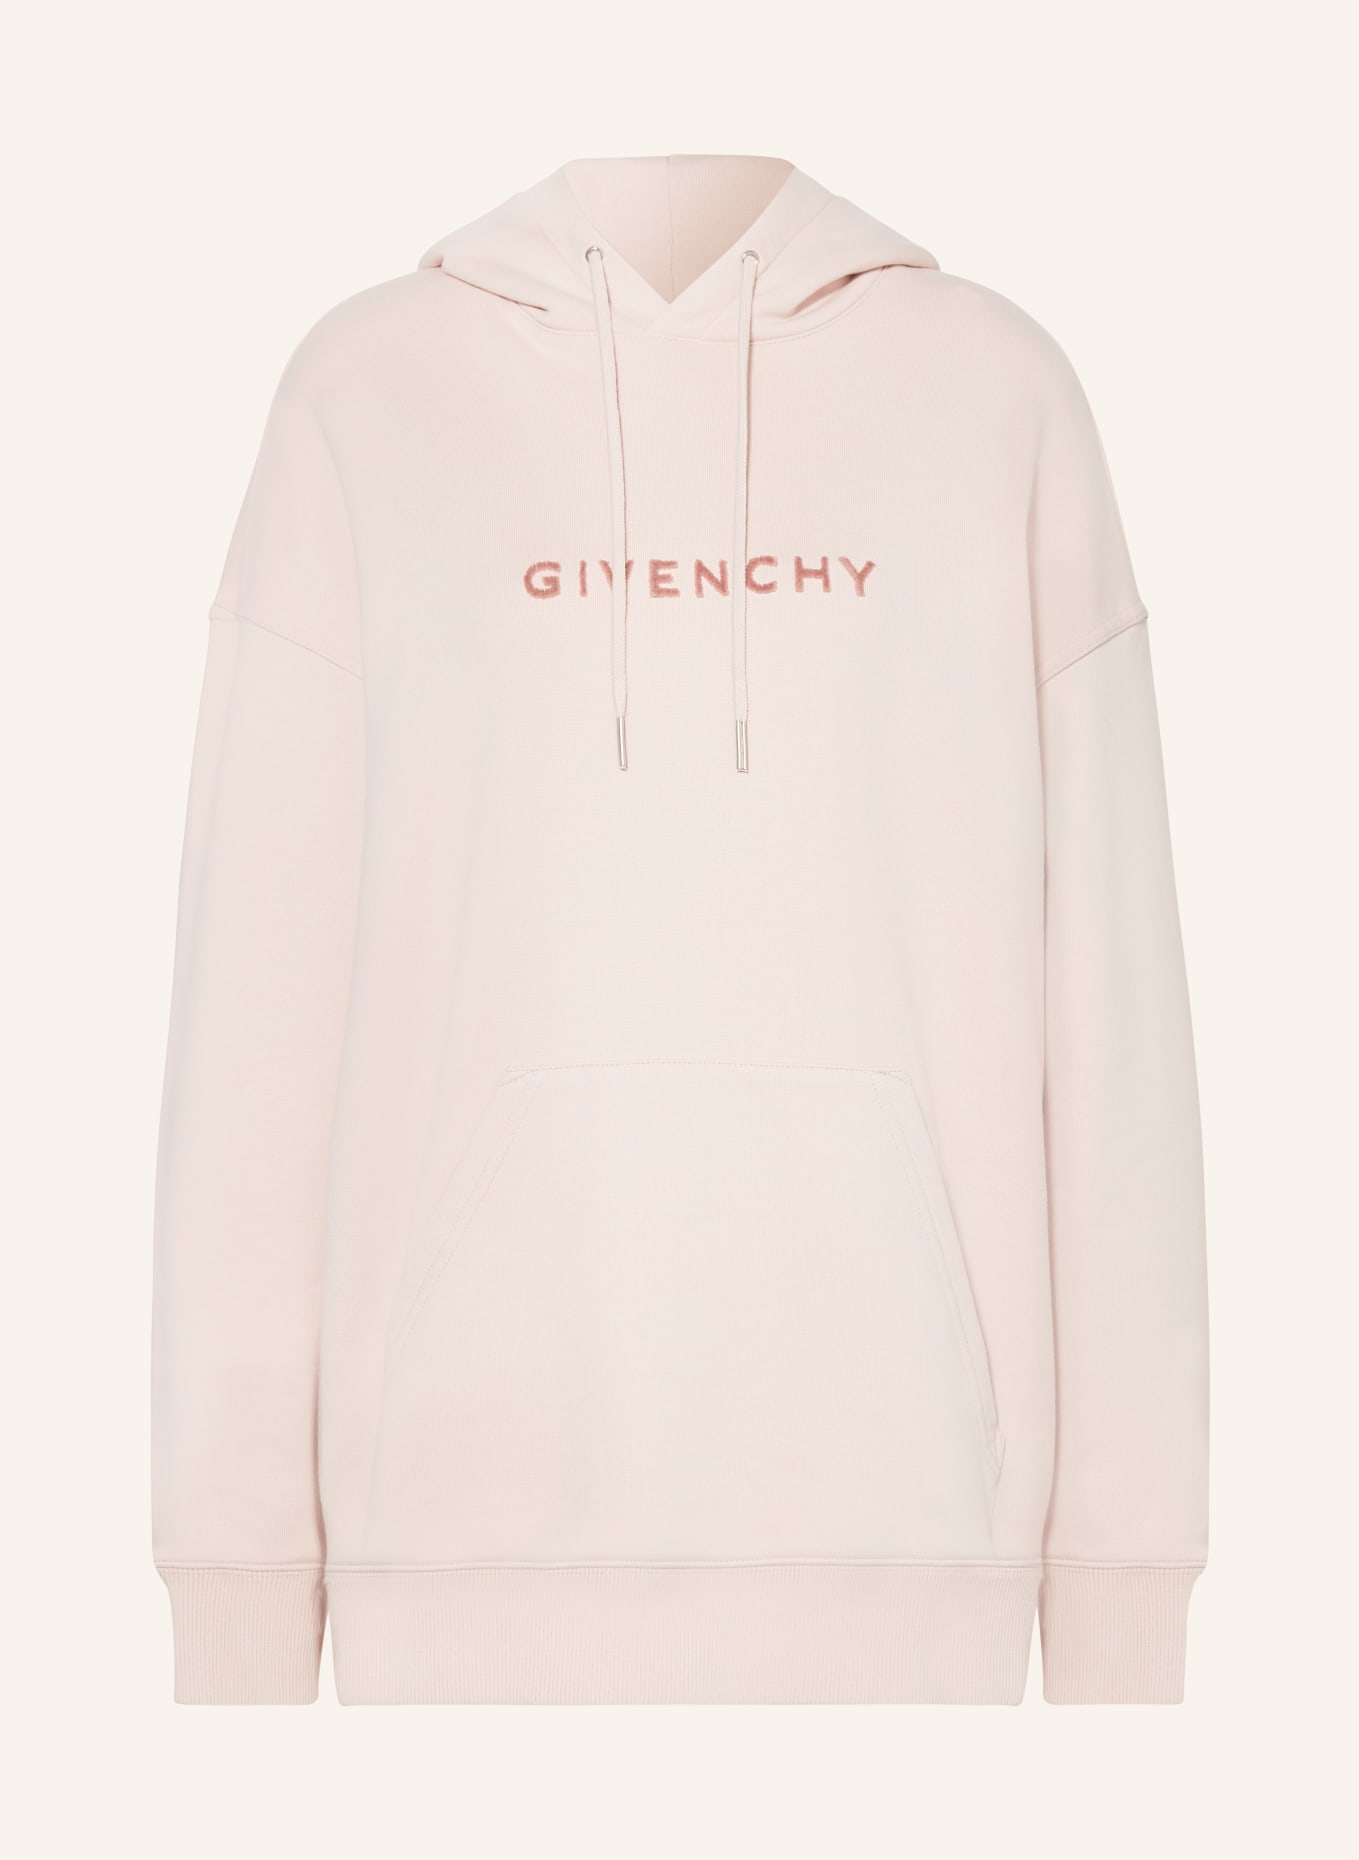 GIVENCHY Oversized hoodie, Color: LIGHT PINK (Image 1)